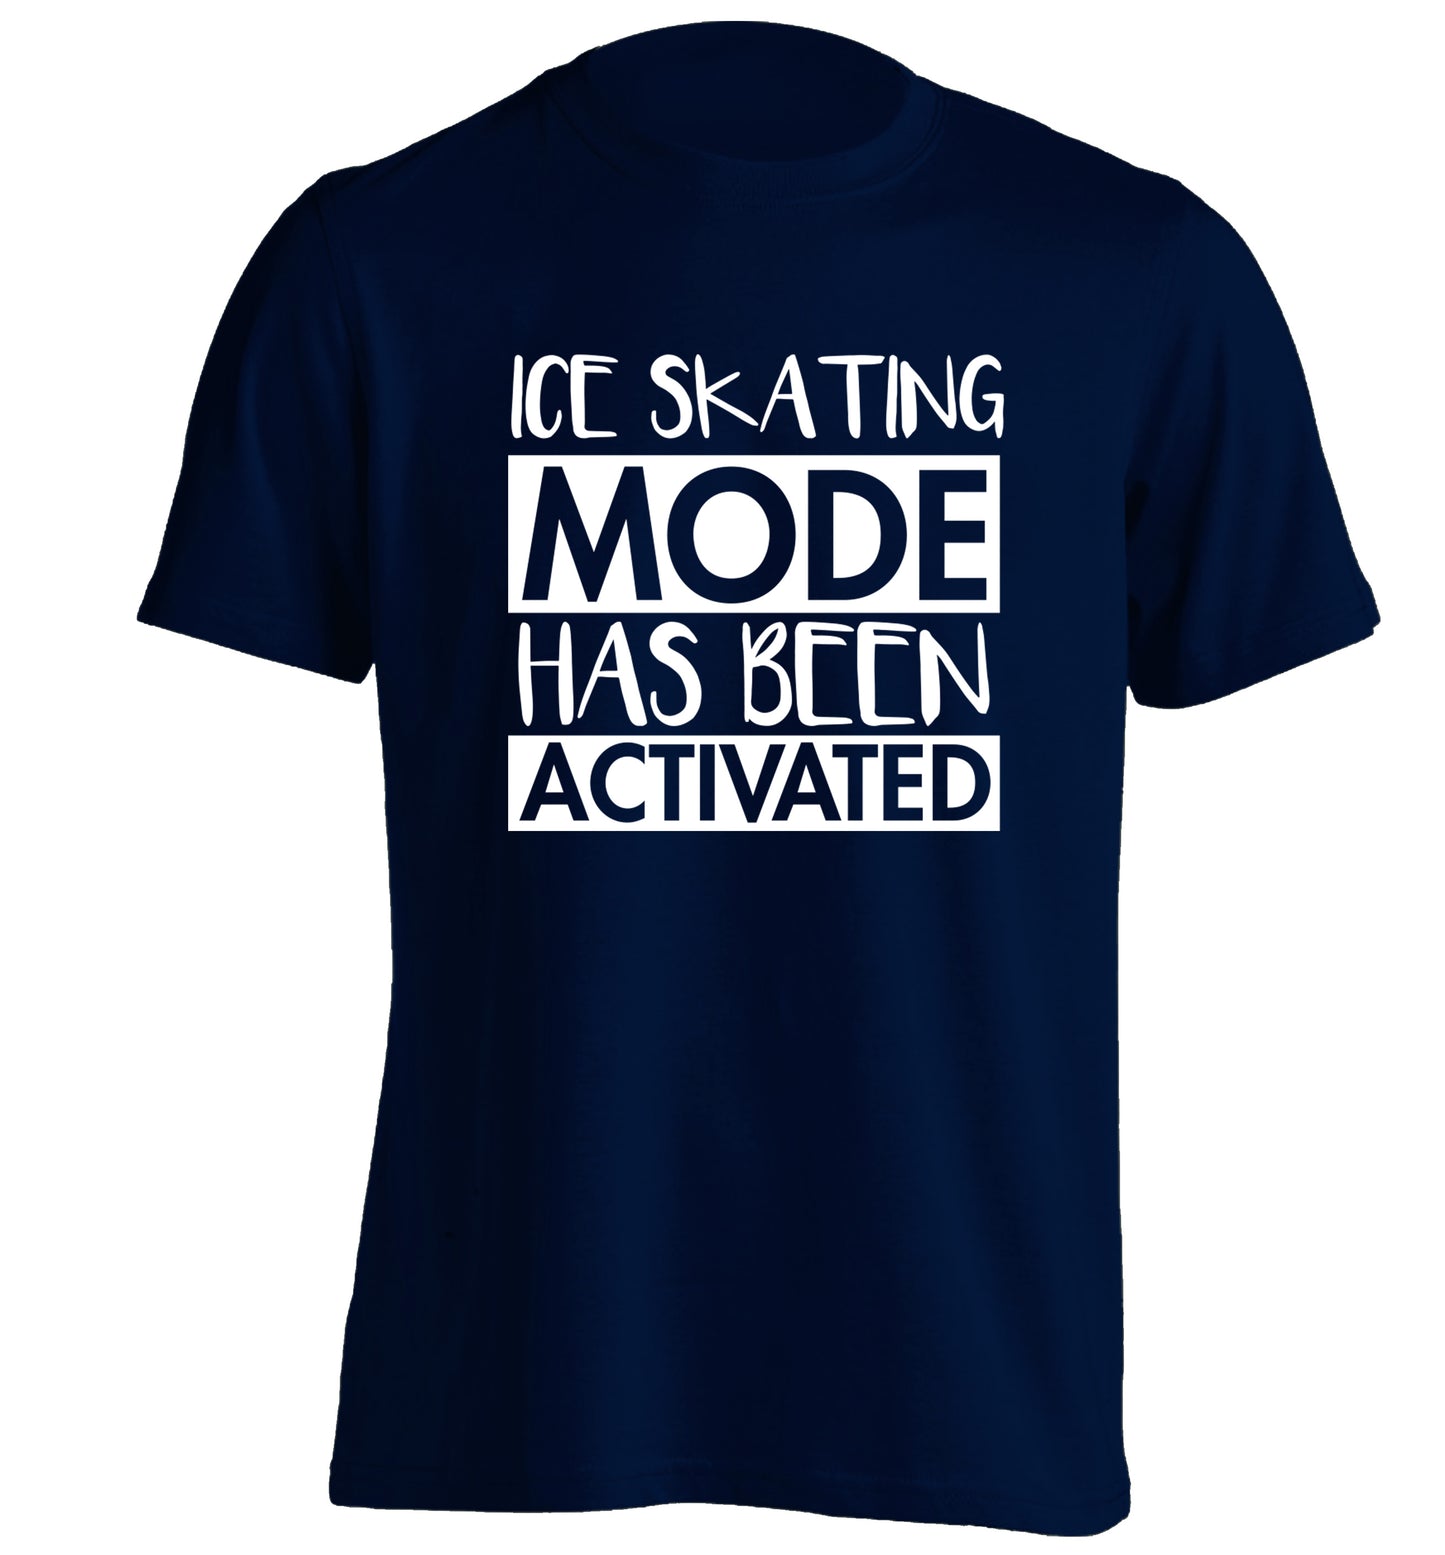 Ice skating mode activated adults unisexnavy Tshirt 2XL